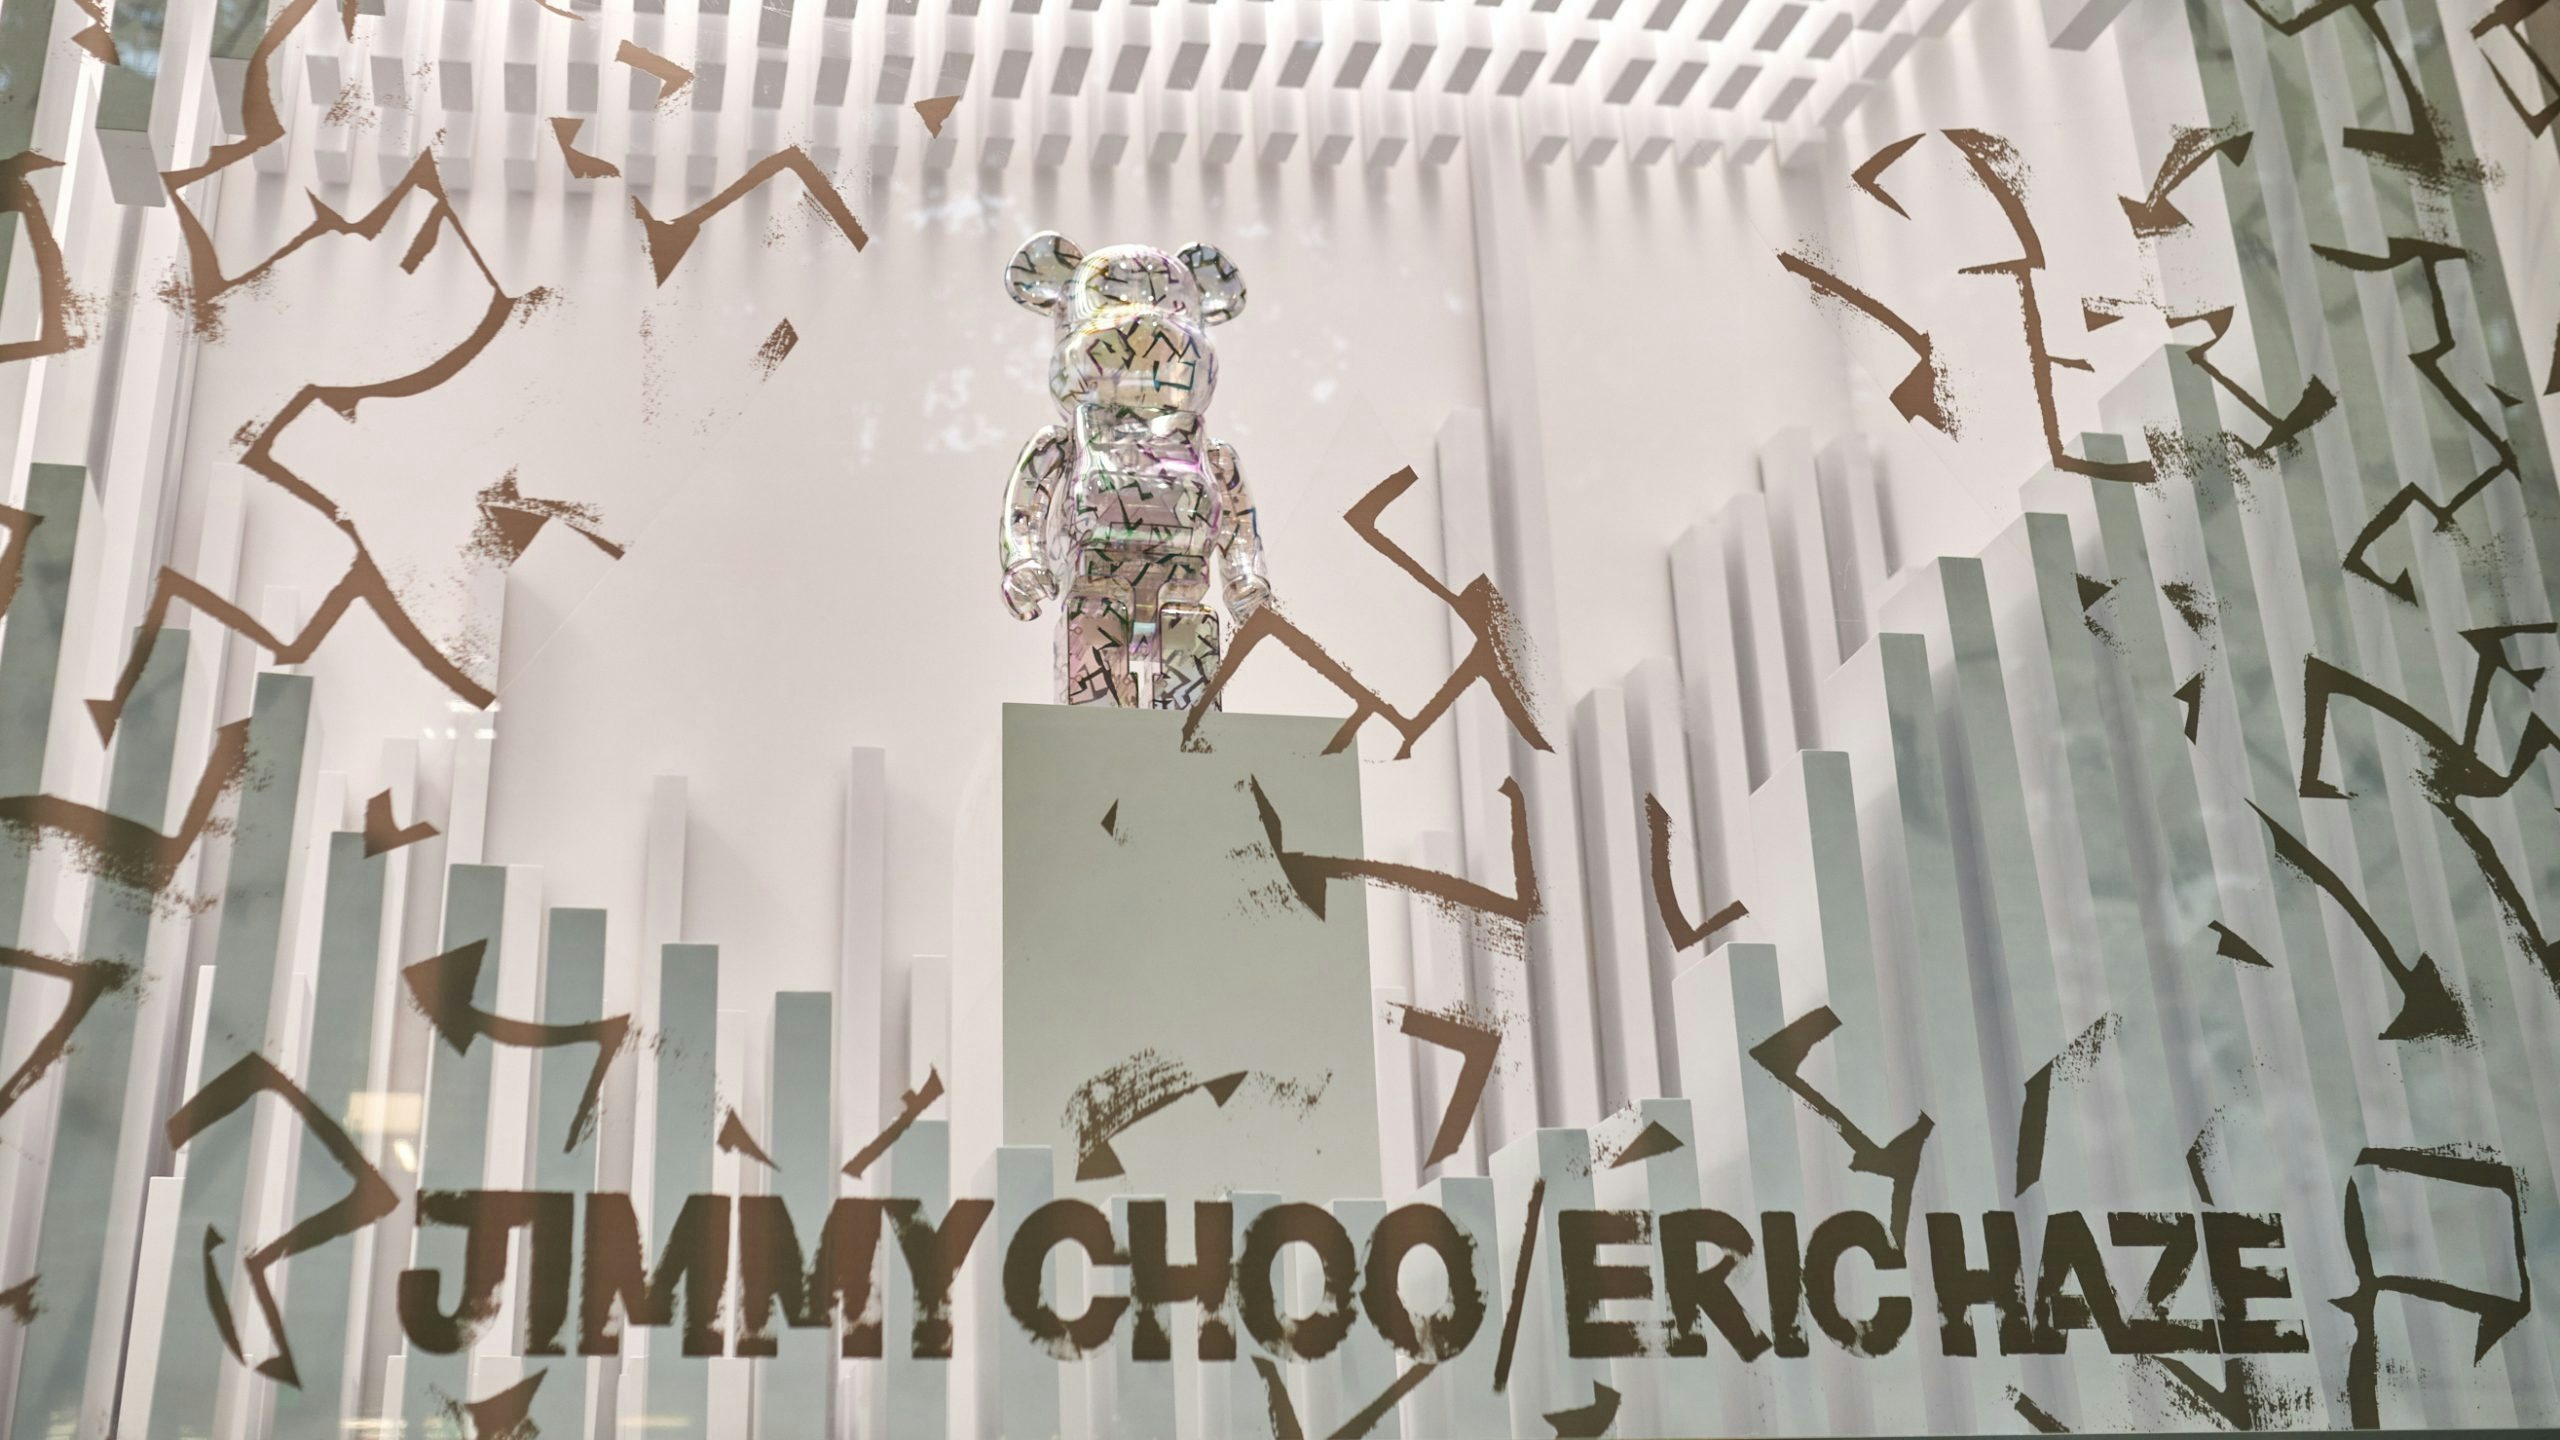 Jimmy Choo’s latest collection, which features NFT and Be@rbrick collectibles alongside accessories, offers Chinese luxury shoppers something special both online and offline. Photo: Courtesy of Jimmy Choo